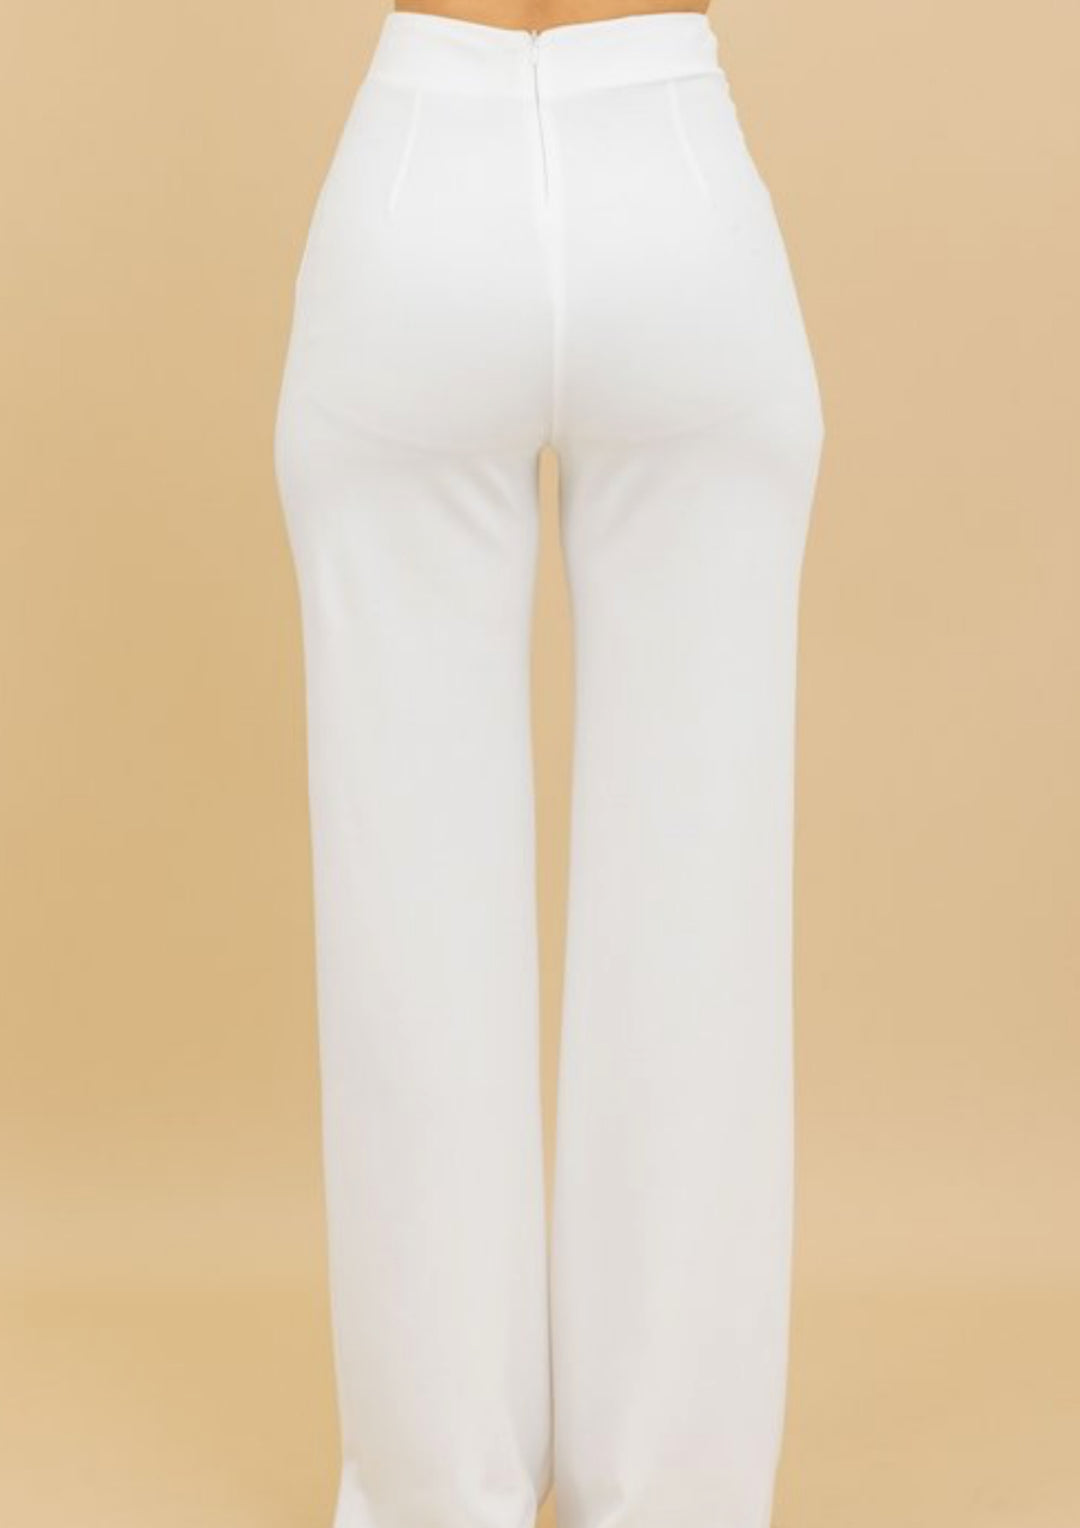 Gold CG creased Flare Pants (More Colors)